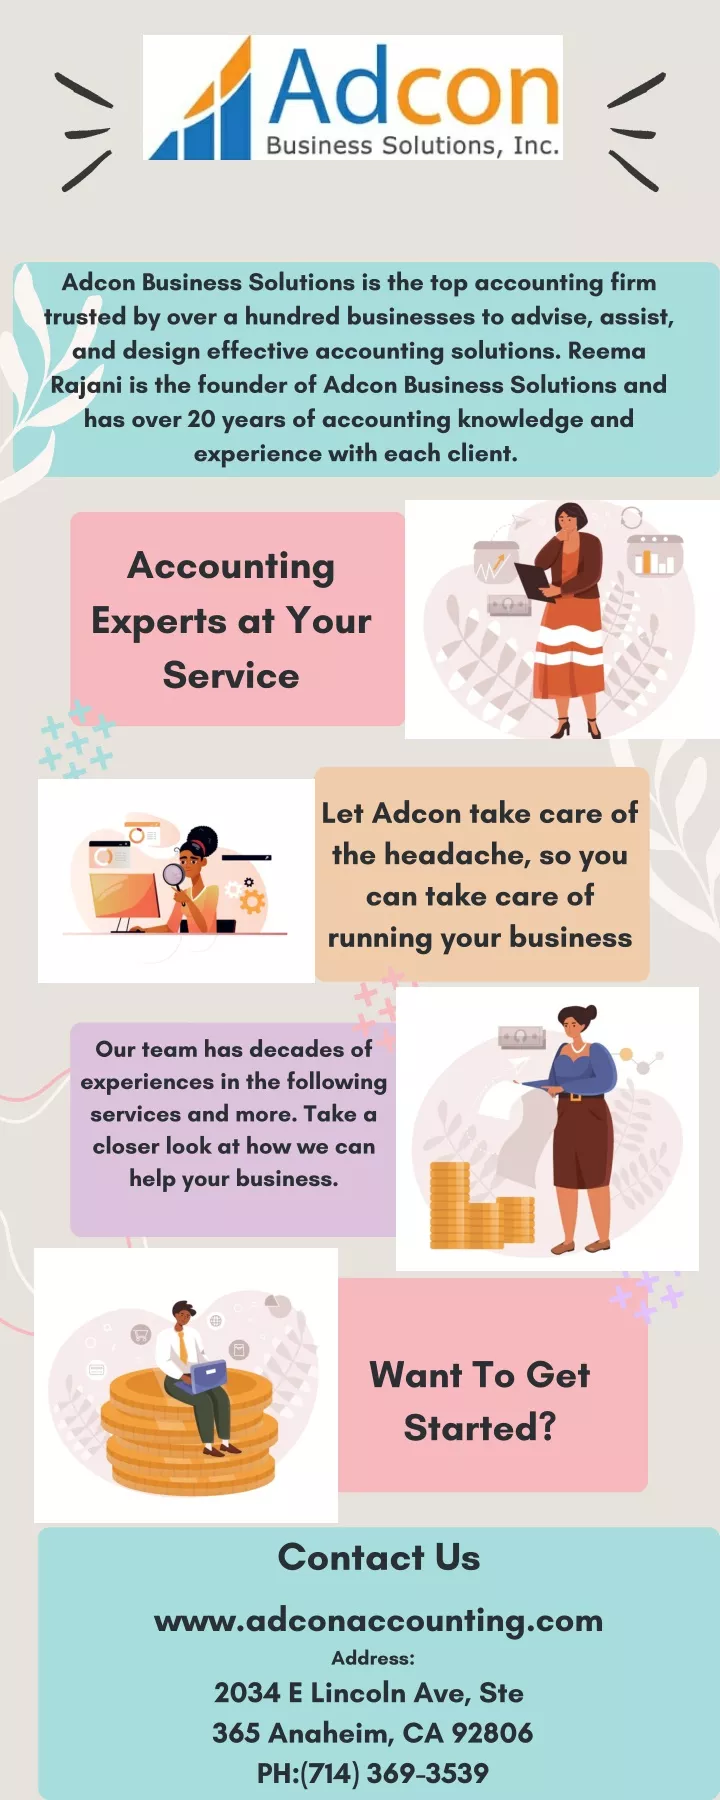 adcon business solutions is the top accounting